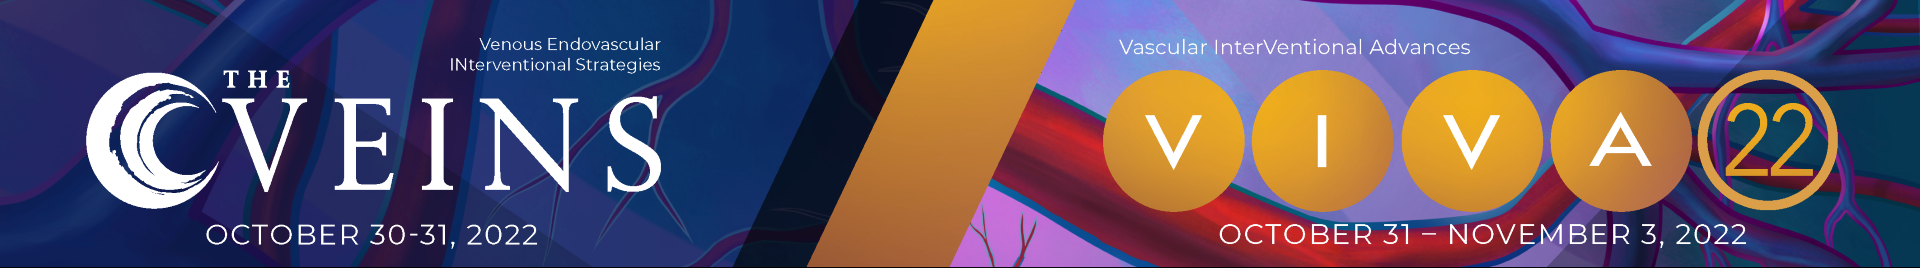 VIVA and The VEINS 2022 Event Banner